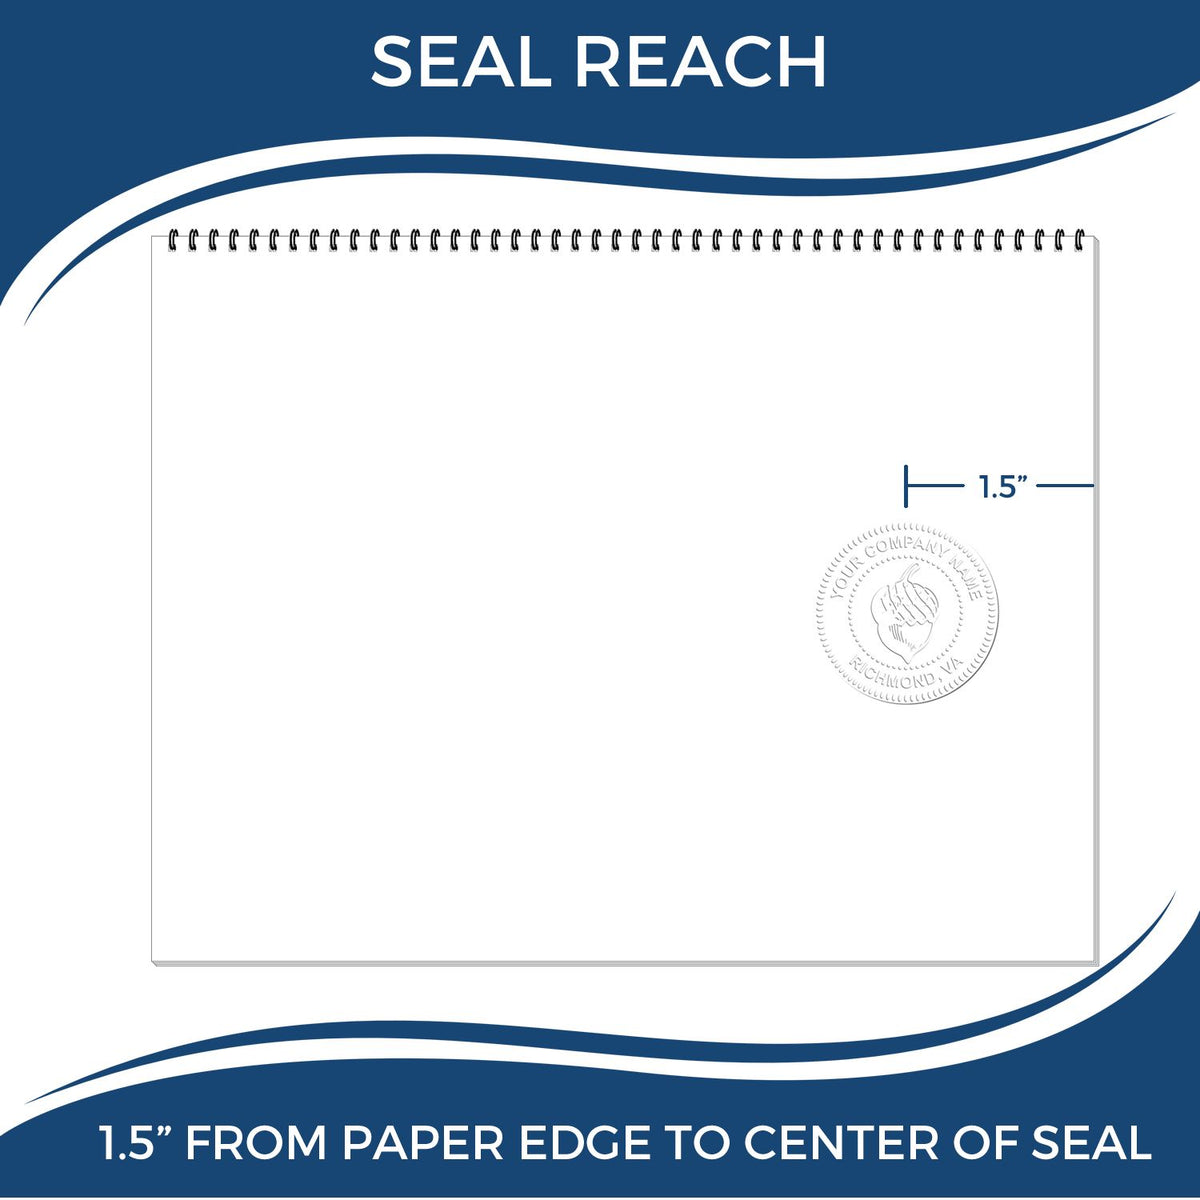 An infographic showing the seal reach which is represented by a ruler and a miniature seal image of the Minnesota Engineer Desk Seal